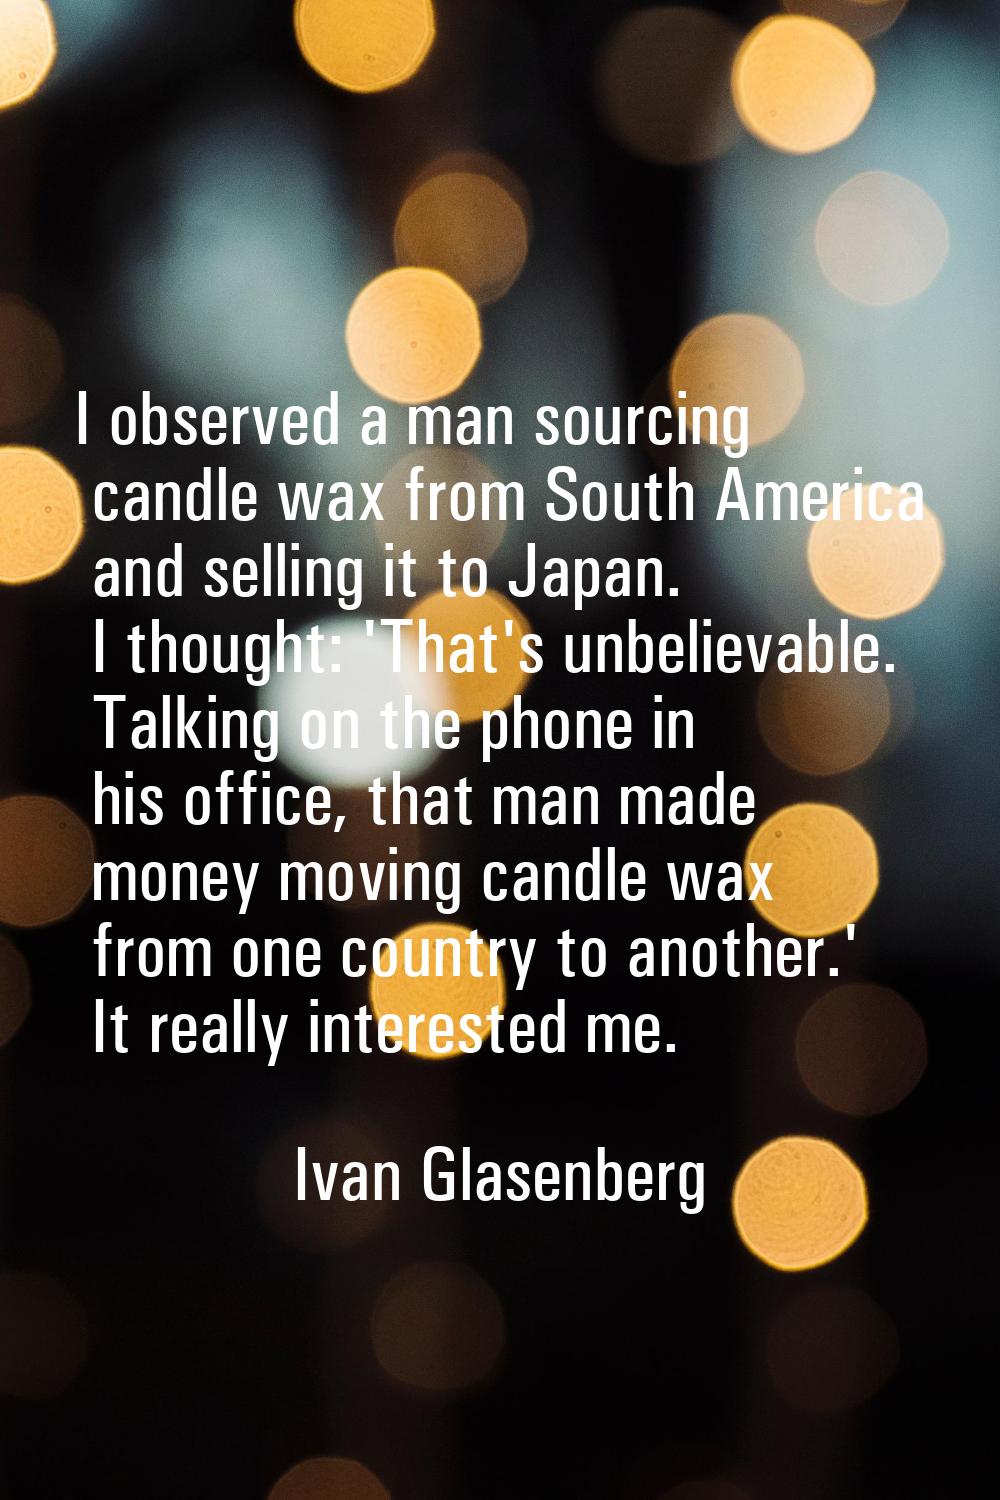 I observed a man sourcing candle wax from South America and selling it to Japan. I thought: 'That's